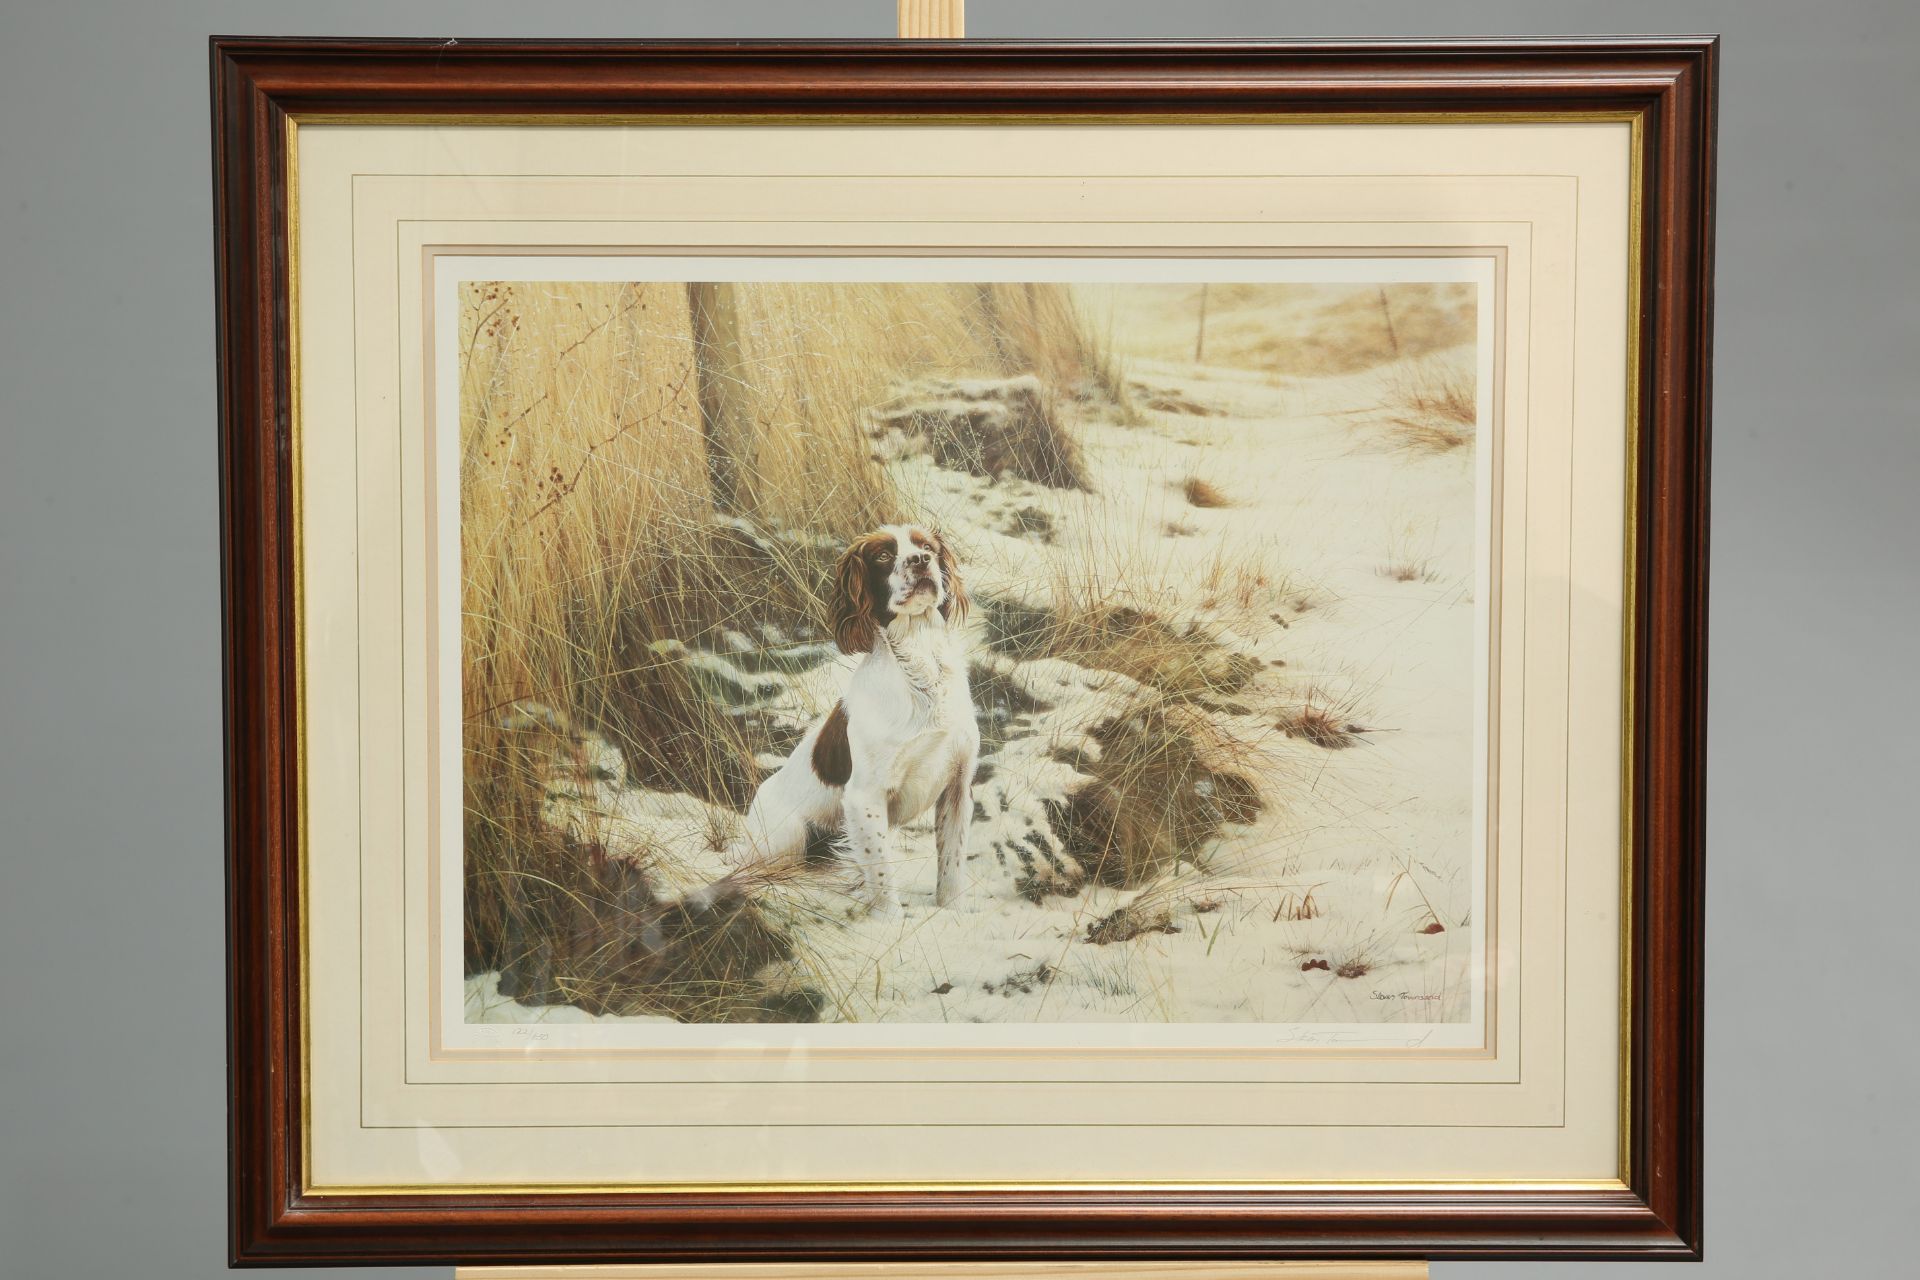 STEVEN TOWNSEND, ANTICIPATION, limited edition print, signed and numbered 122/650 in pencil, framed.